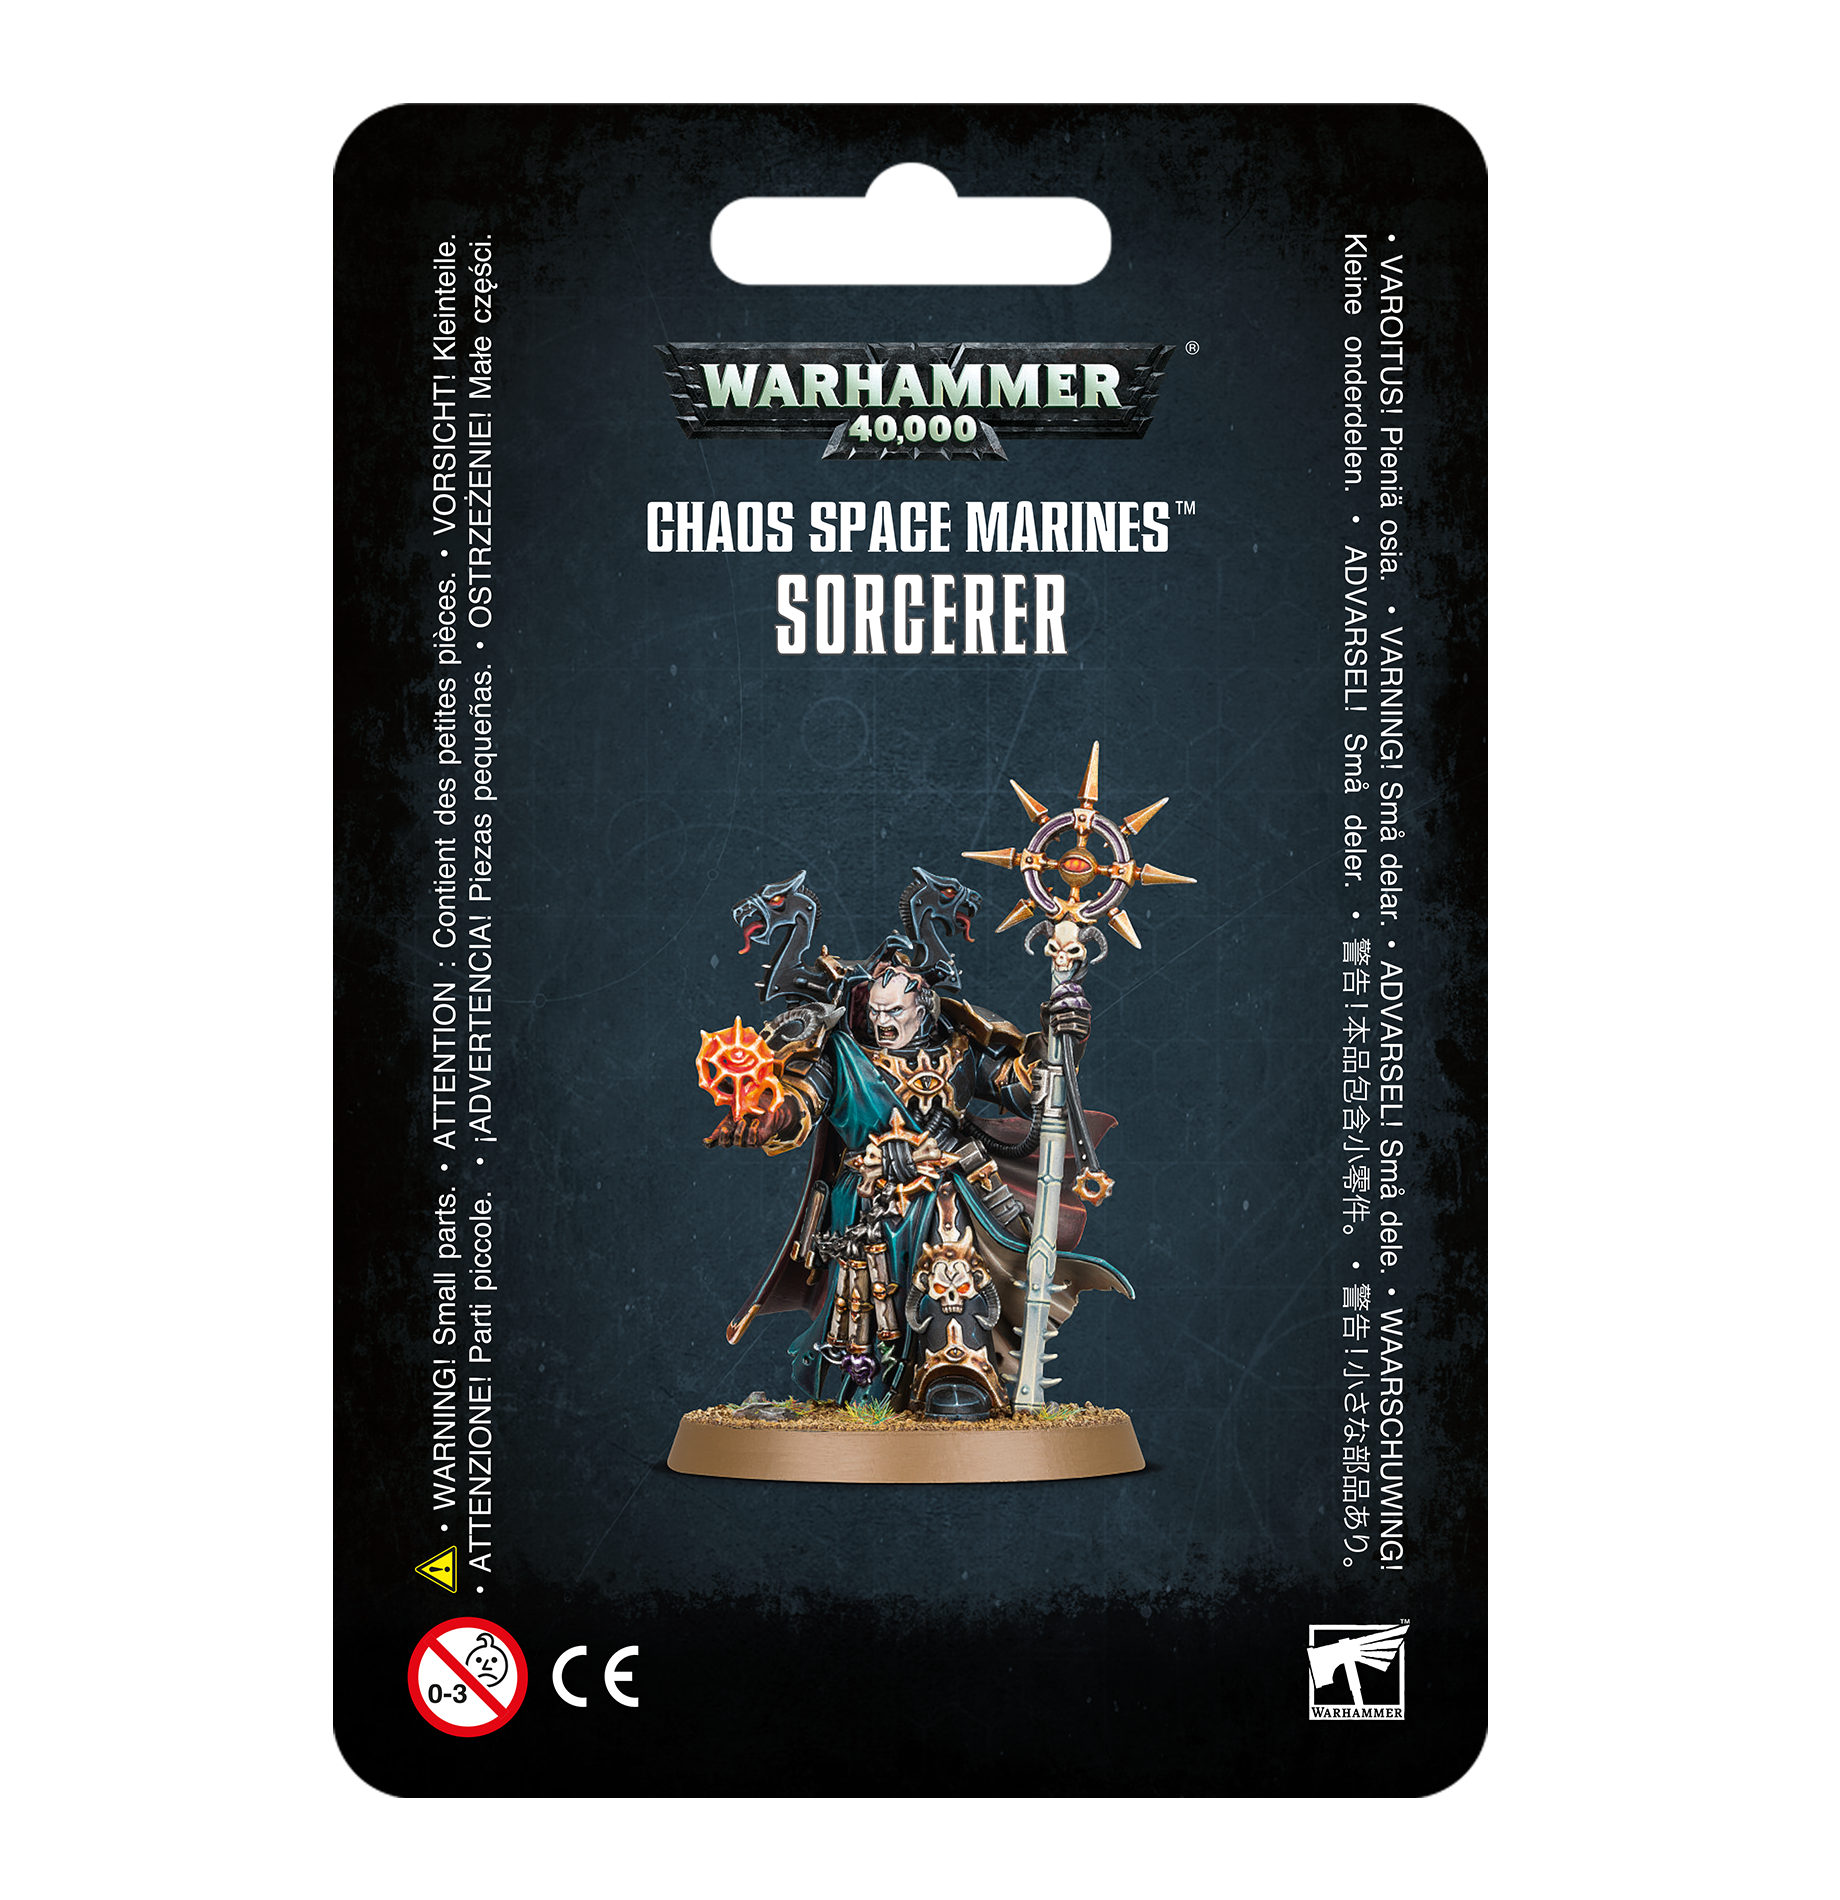 CHAOS SPACE MARINES: SORCERER